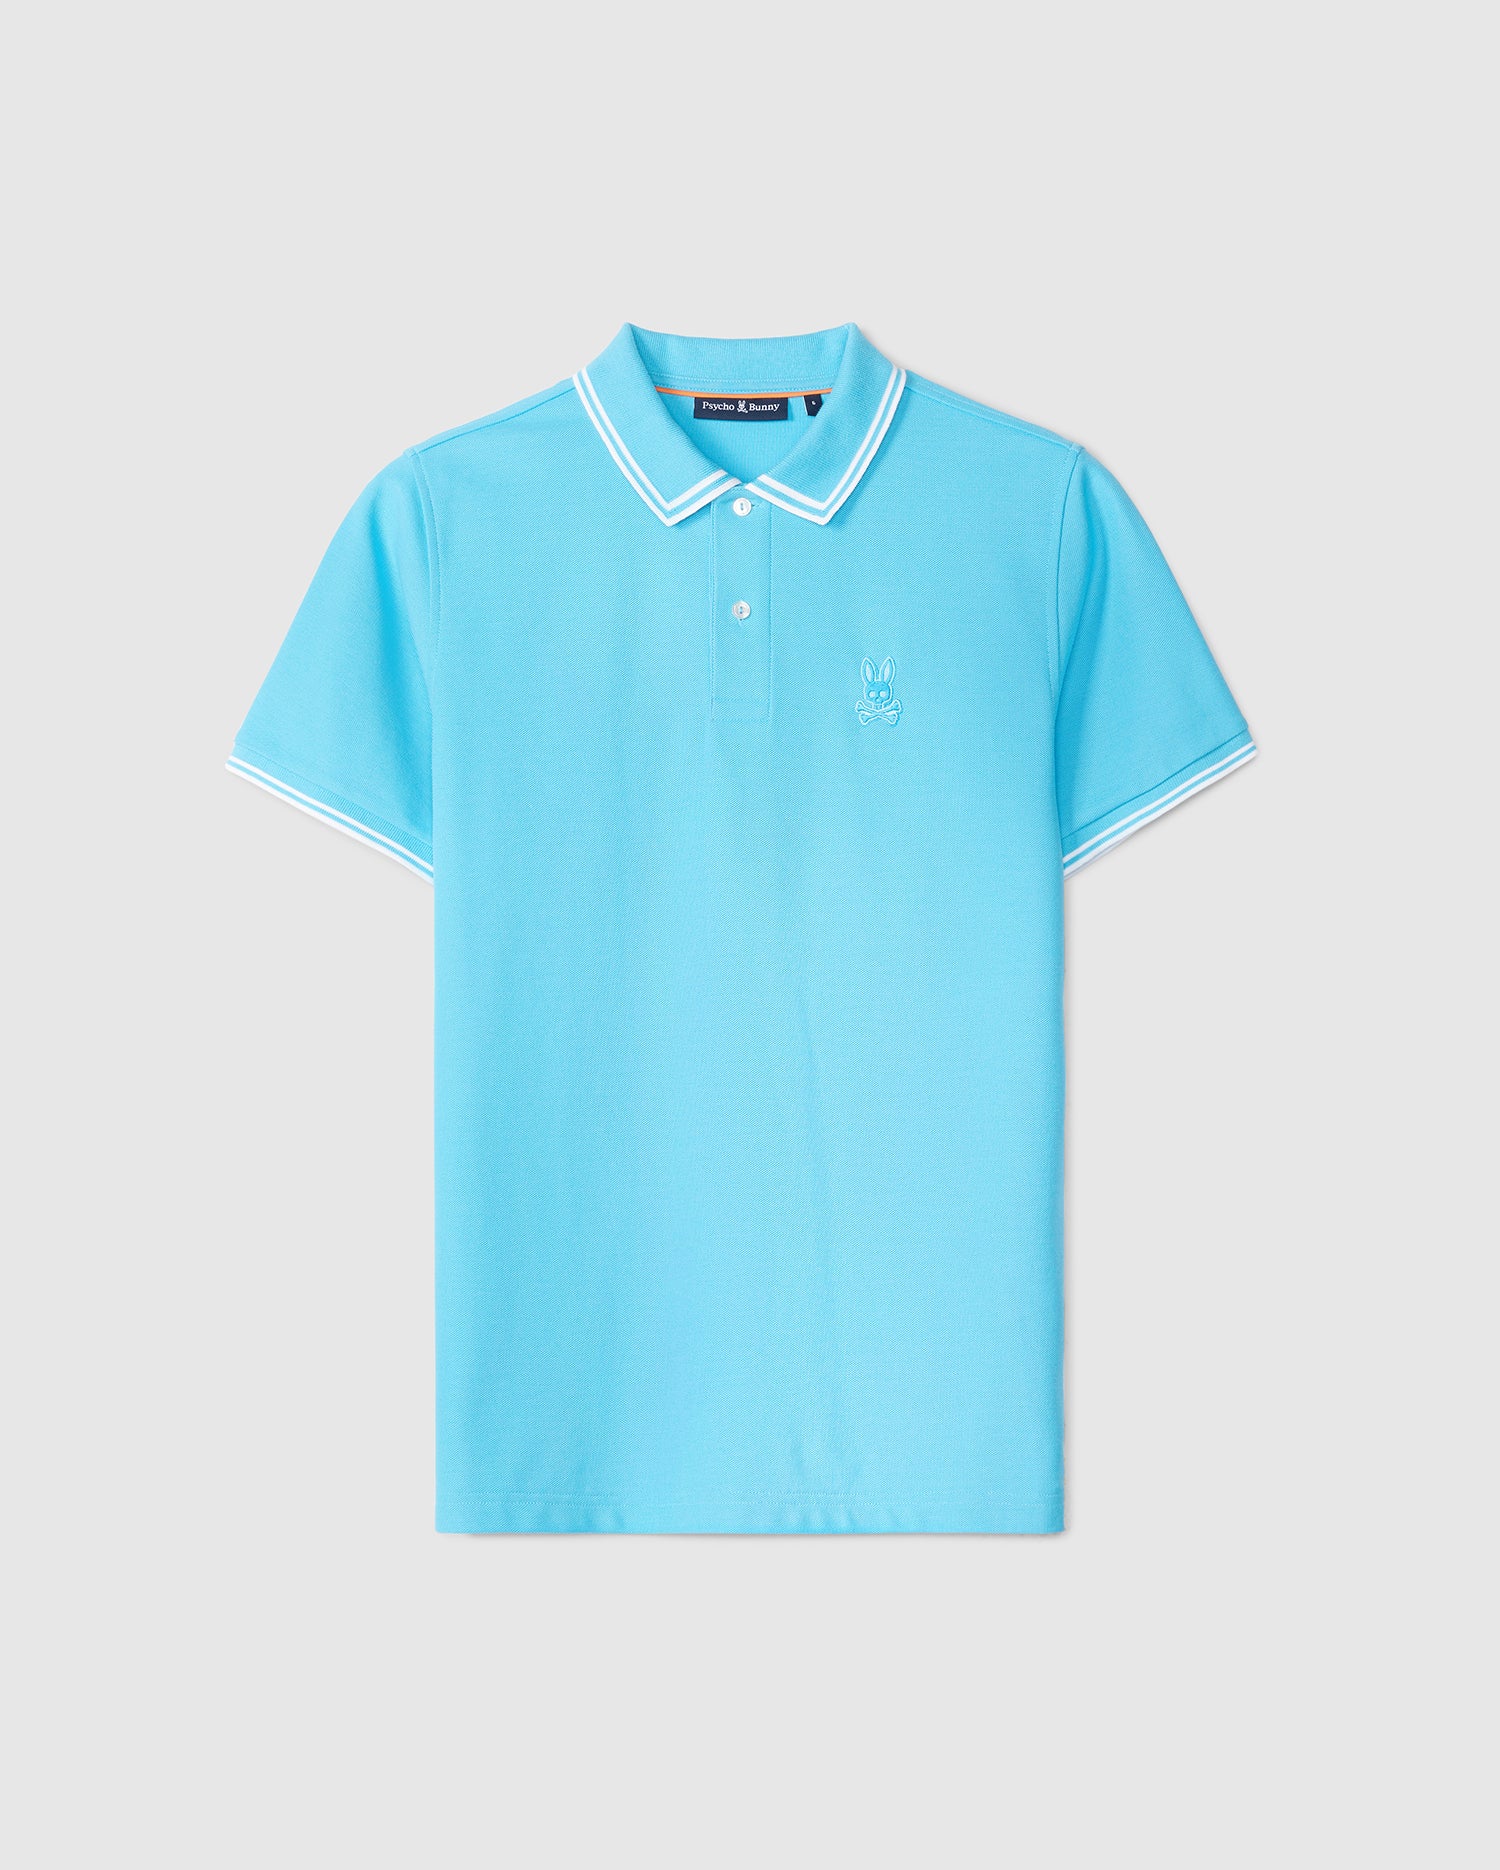 A light blue short-sleeved Psycho Bunny MENS BELTON PIQUE POLO - B6K575C200 with white trim on the collar and sleeve cuffs. Made from luxurious Pima cotton, the shirt features a small embroidered Bunny logo on the left side of the chest. It is displayed against a plain light grey background.